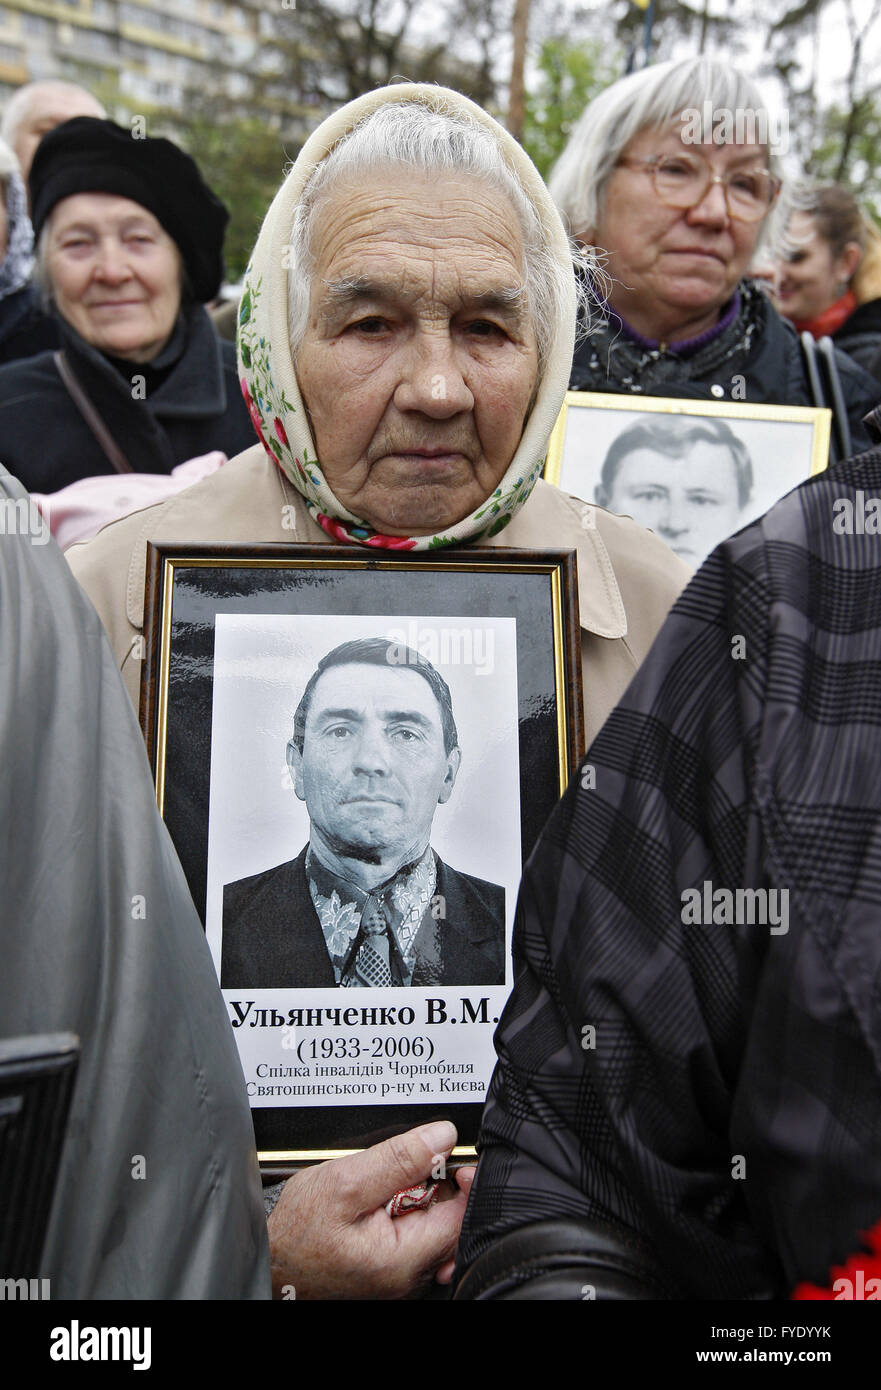 Kiev, Ukraine. 26th Apr, 2016. Ukrainian women hold portraits of lost relatives, victims of the Chernobyl nuclear disaster, near the Chernobyl victims memorial complex. Ukrainian mark the 30th anniversary of Chernobyl's tragedy, the biggest accident in the history of nuclear power generation, that killed thousands. Credit:  Vasyl Shevchenko/Pacific Press/Alamy Live News Stock Photo